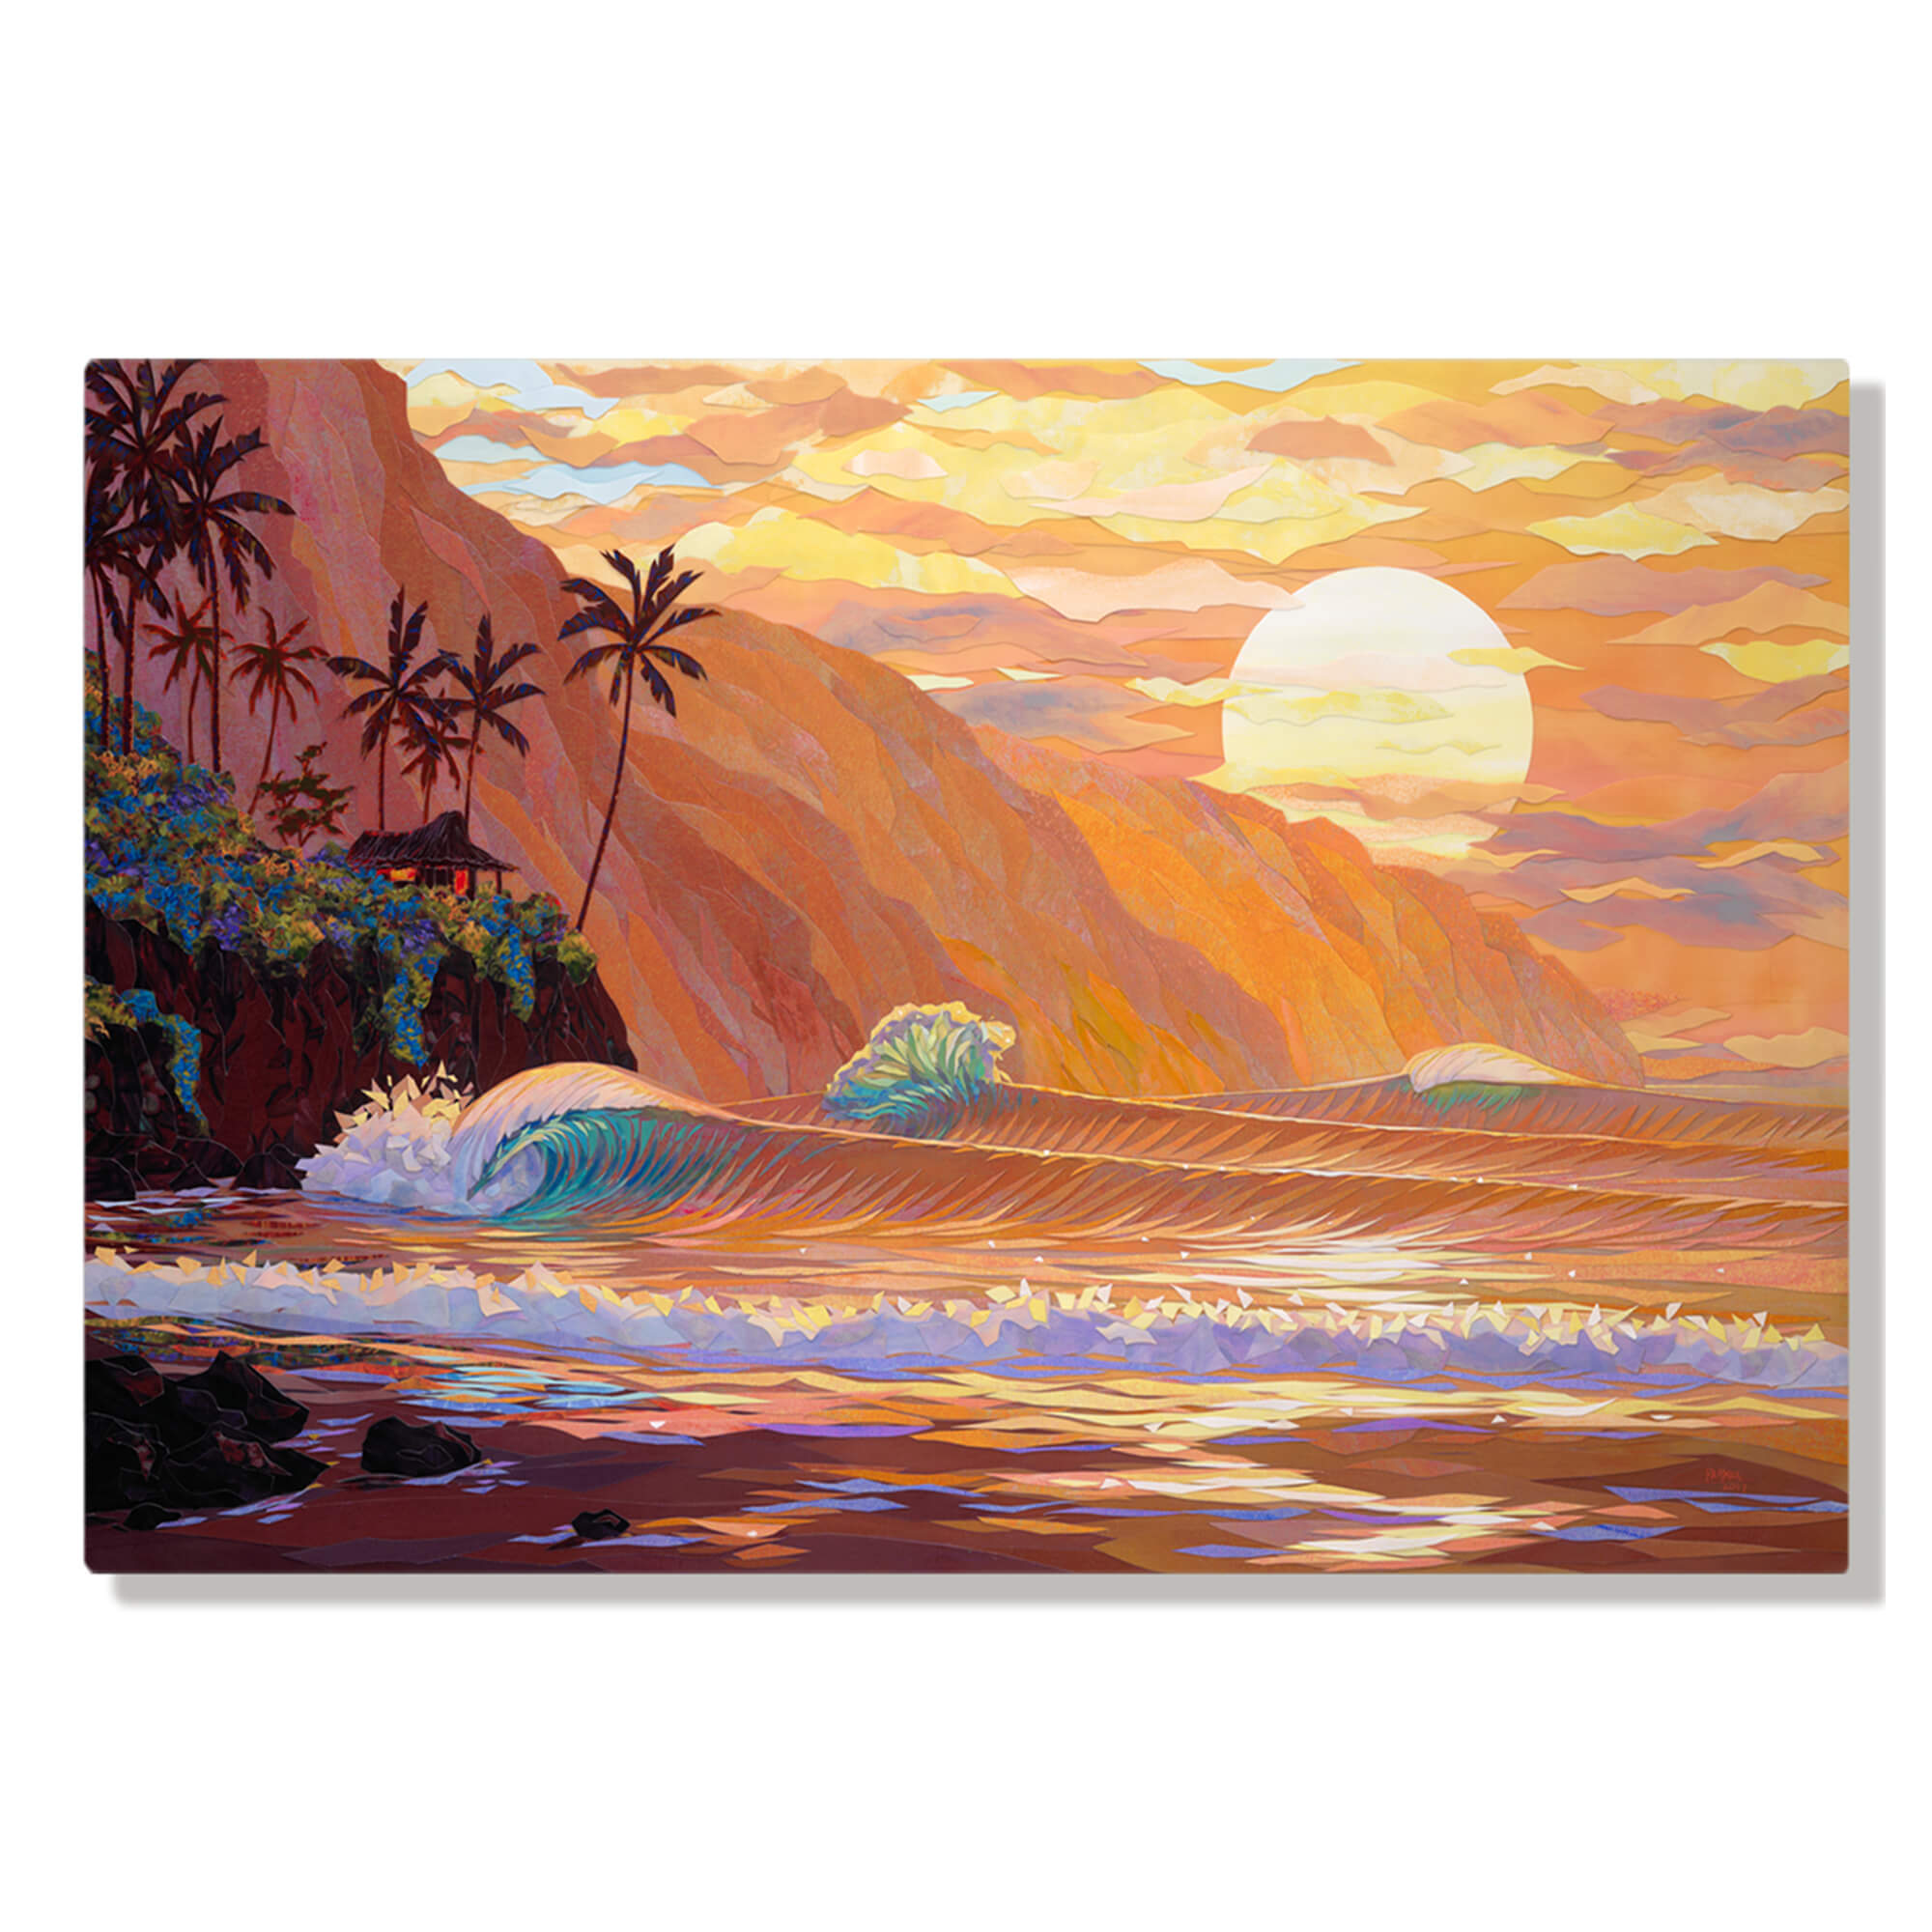 A metal art print featuring a collage of a sunset view of the ocean as seen from a tropical beach in Hawaii, and a mountain background, by Maui artist Patrick Parker